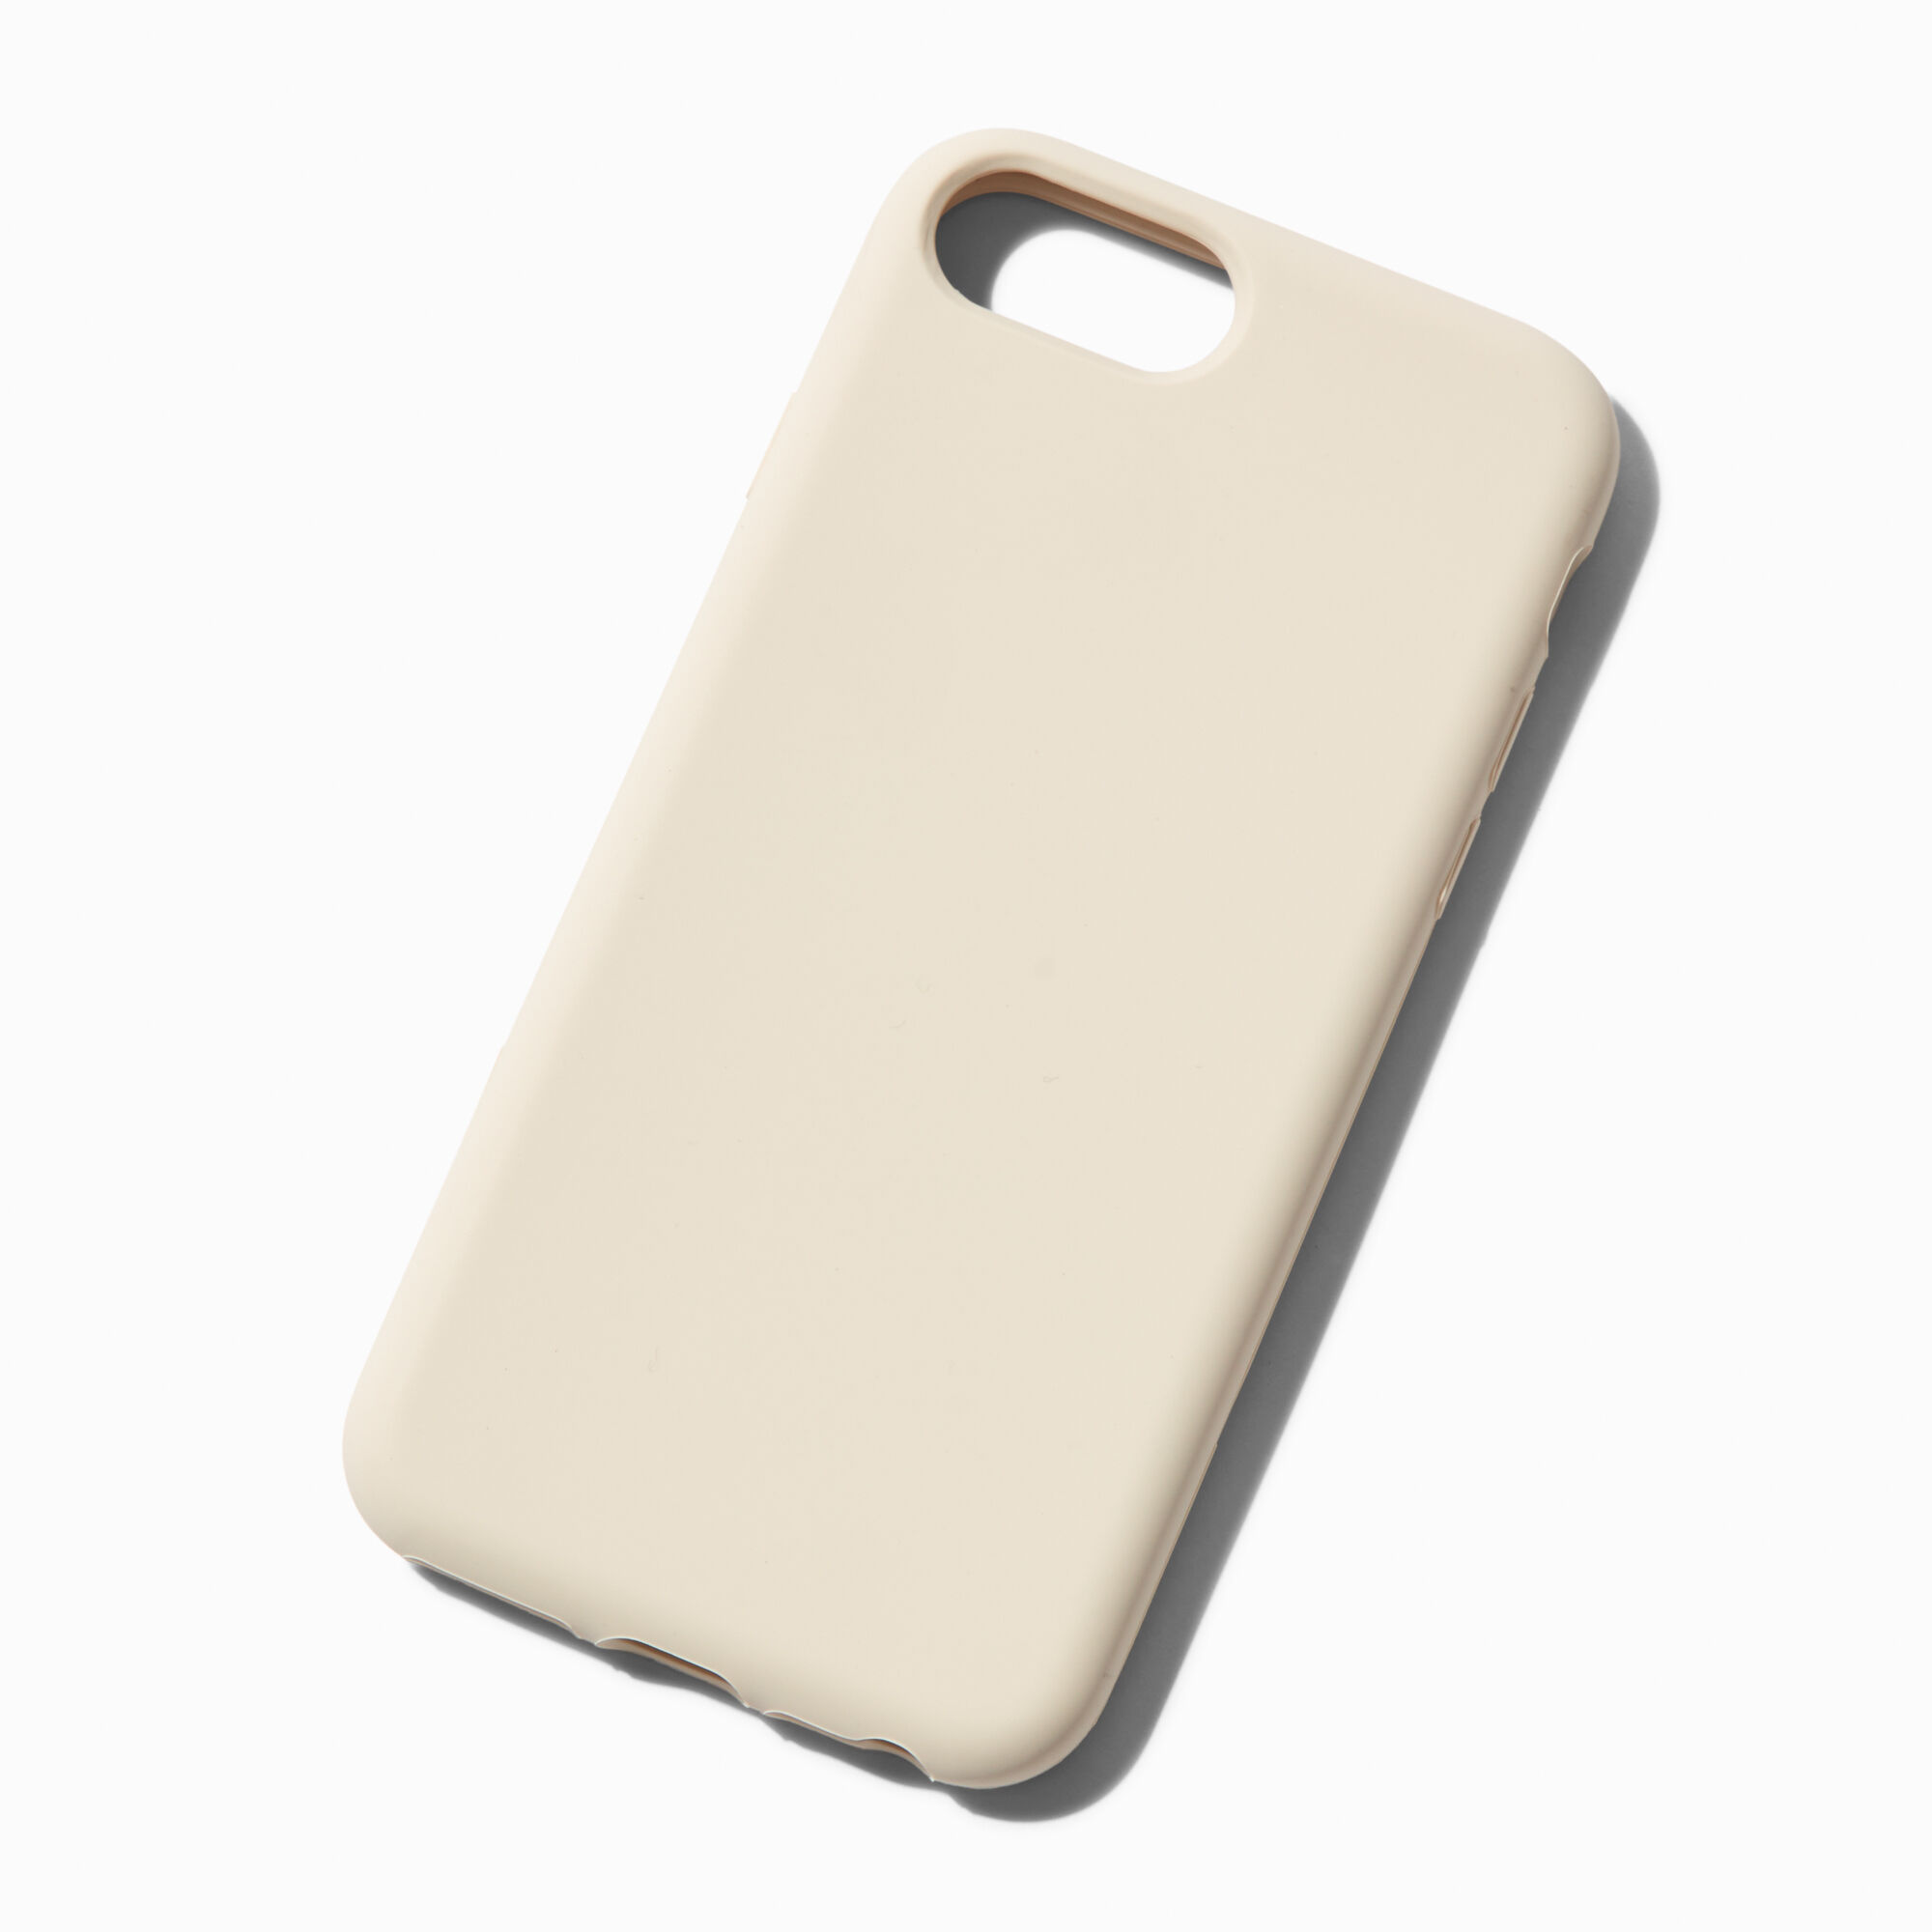 View Claires Solid Silicone Phone Case Fits Iphone 678se Ivory information